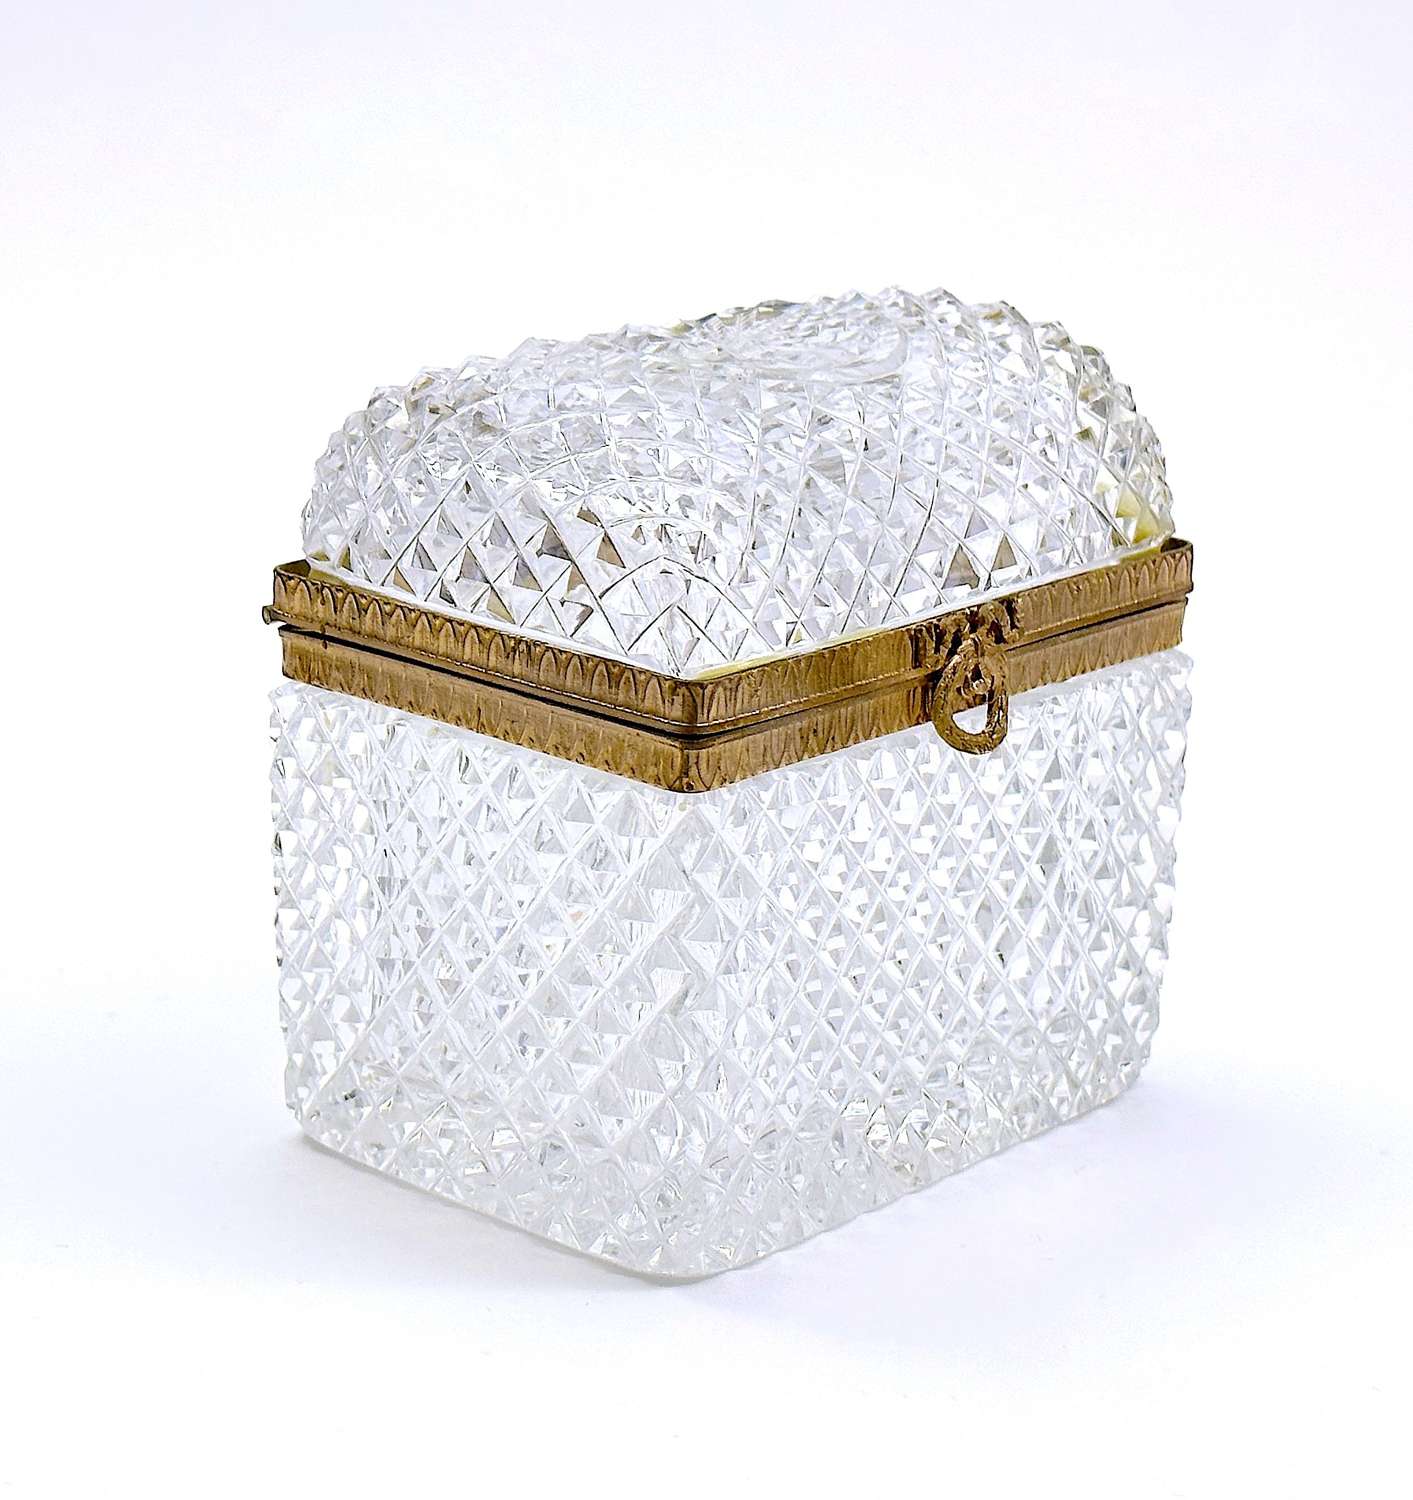 Antique Baccarat Cut Crystal Glass Domed Casket Box with Bow Clasp.